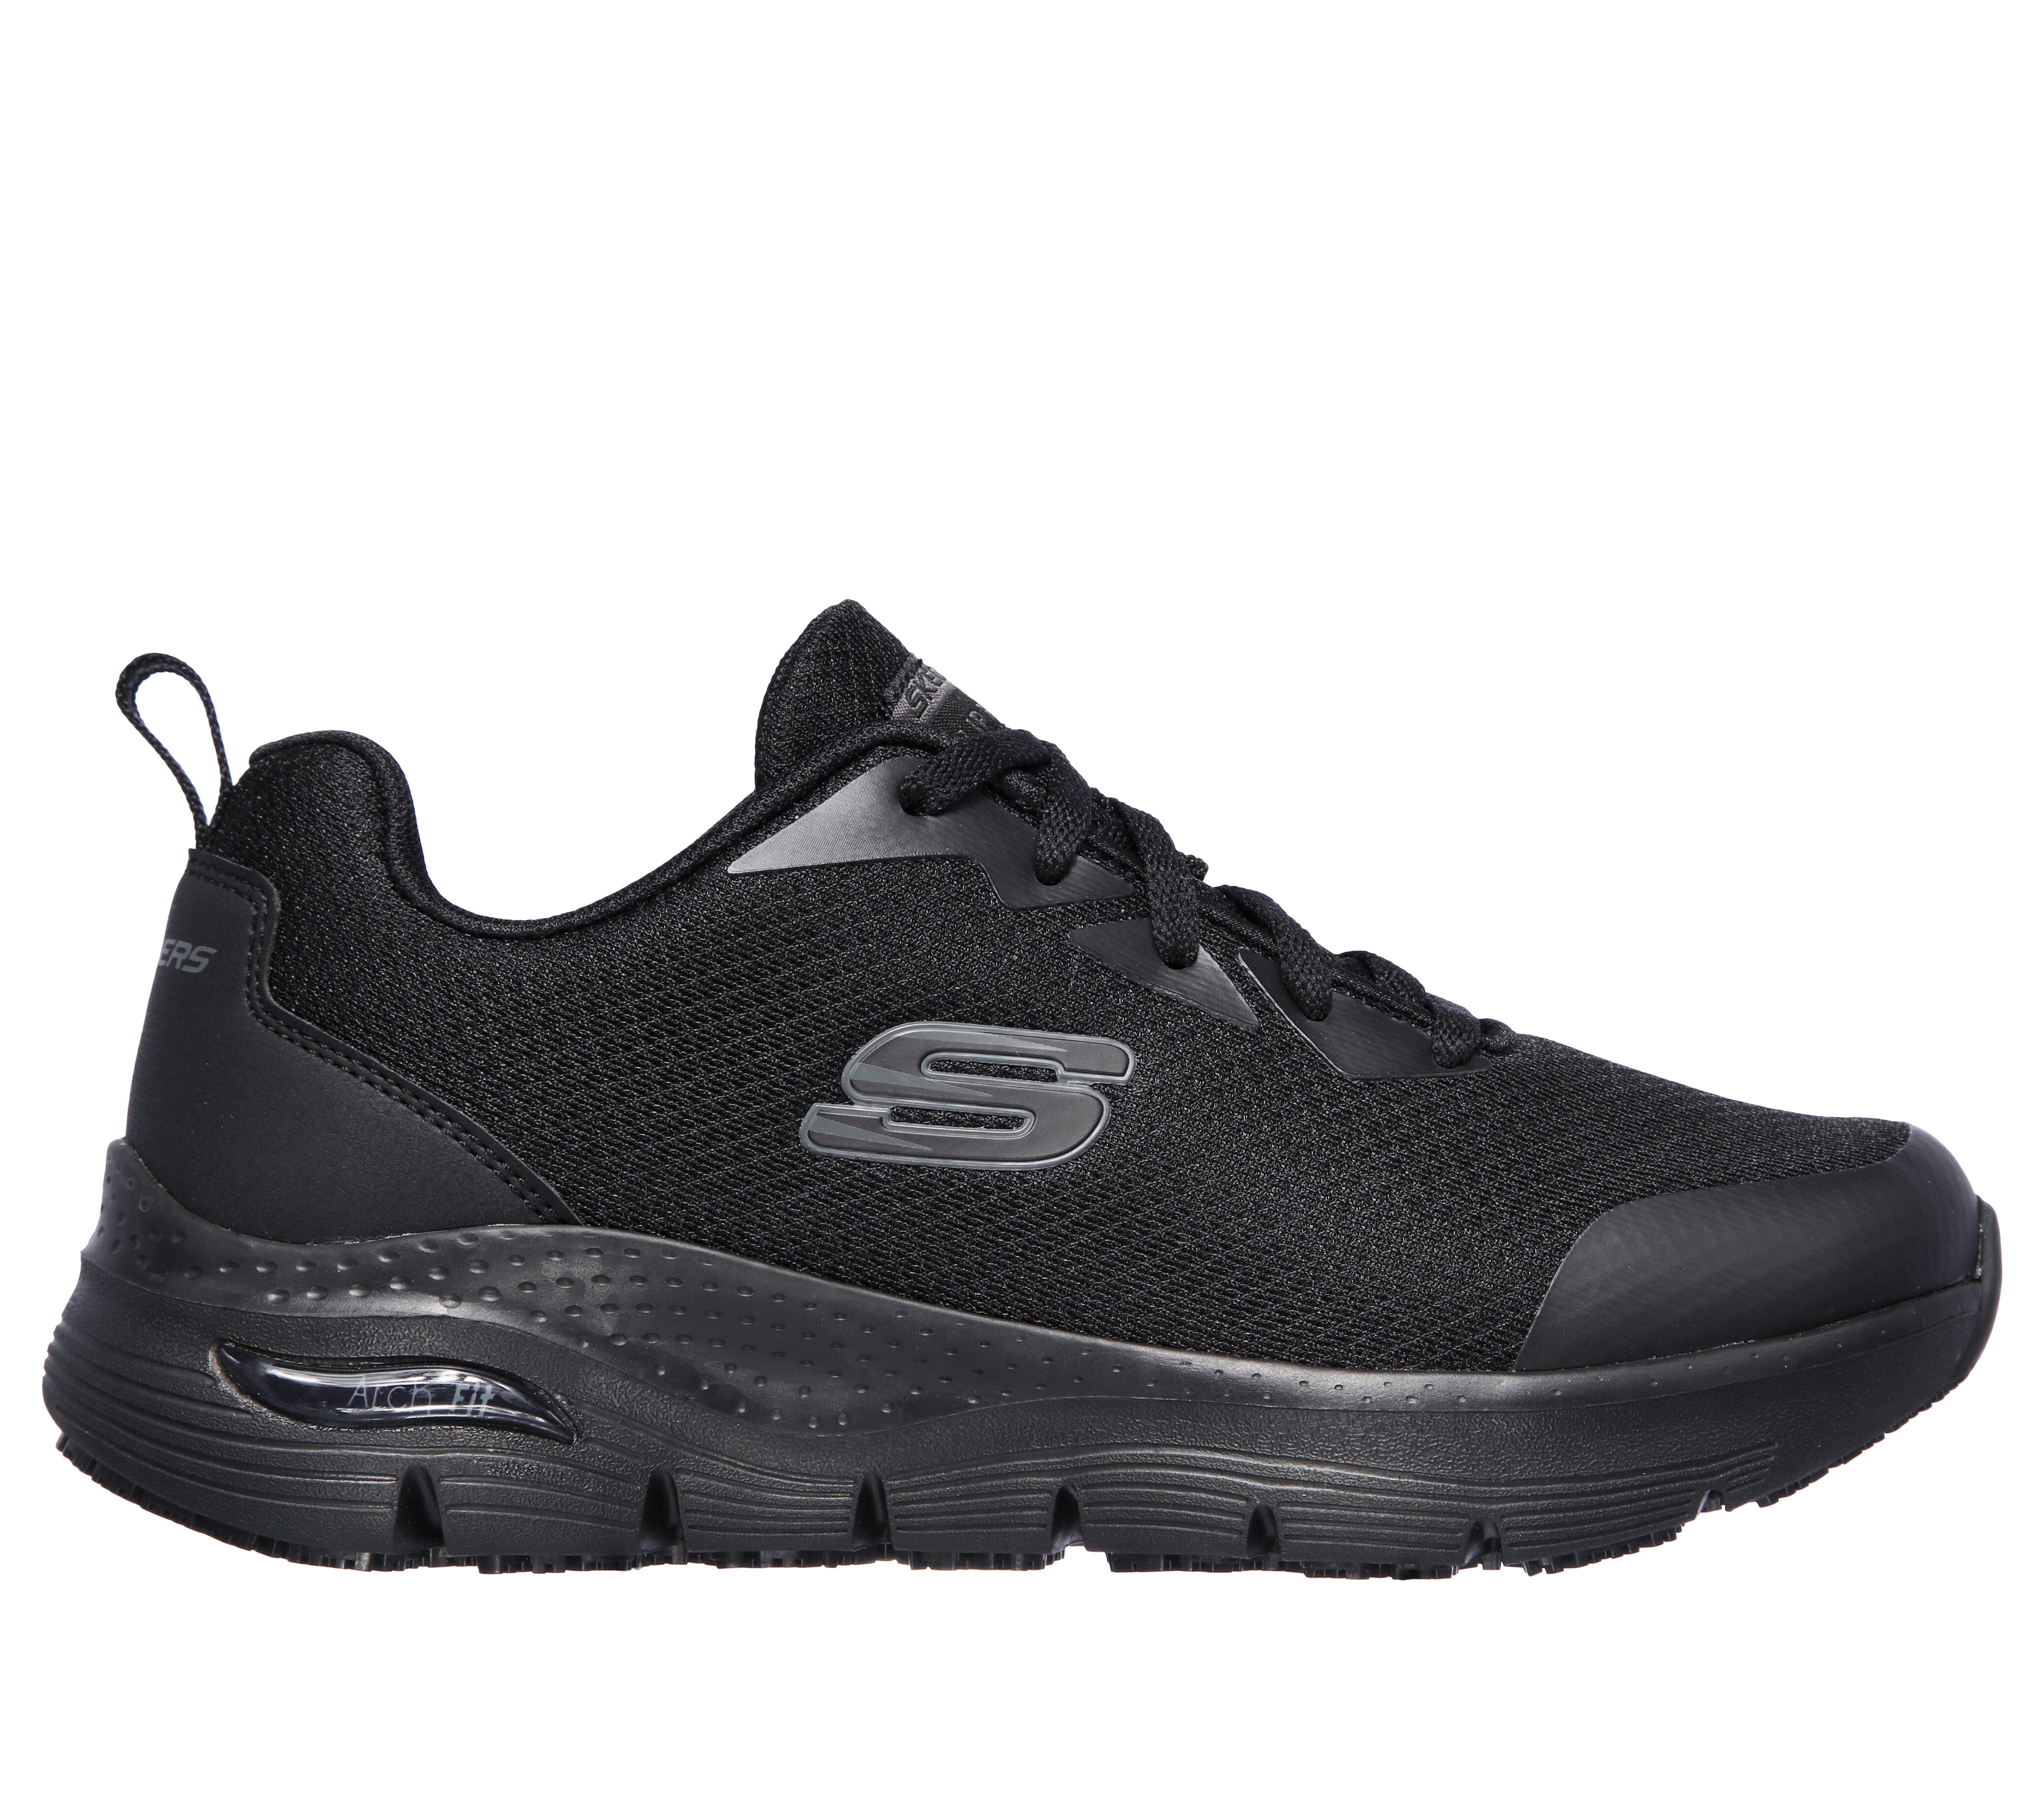 sketchers air cooled shoes